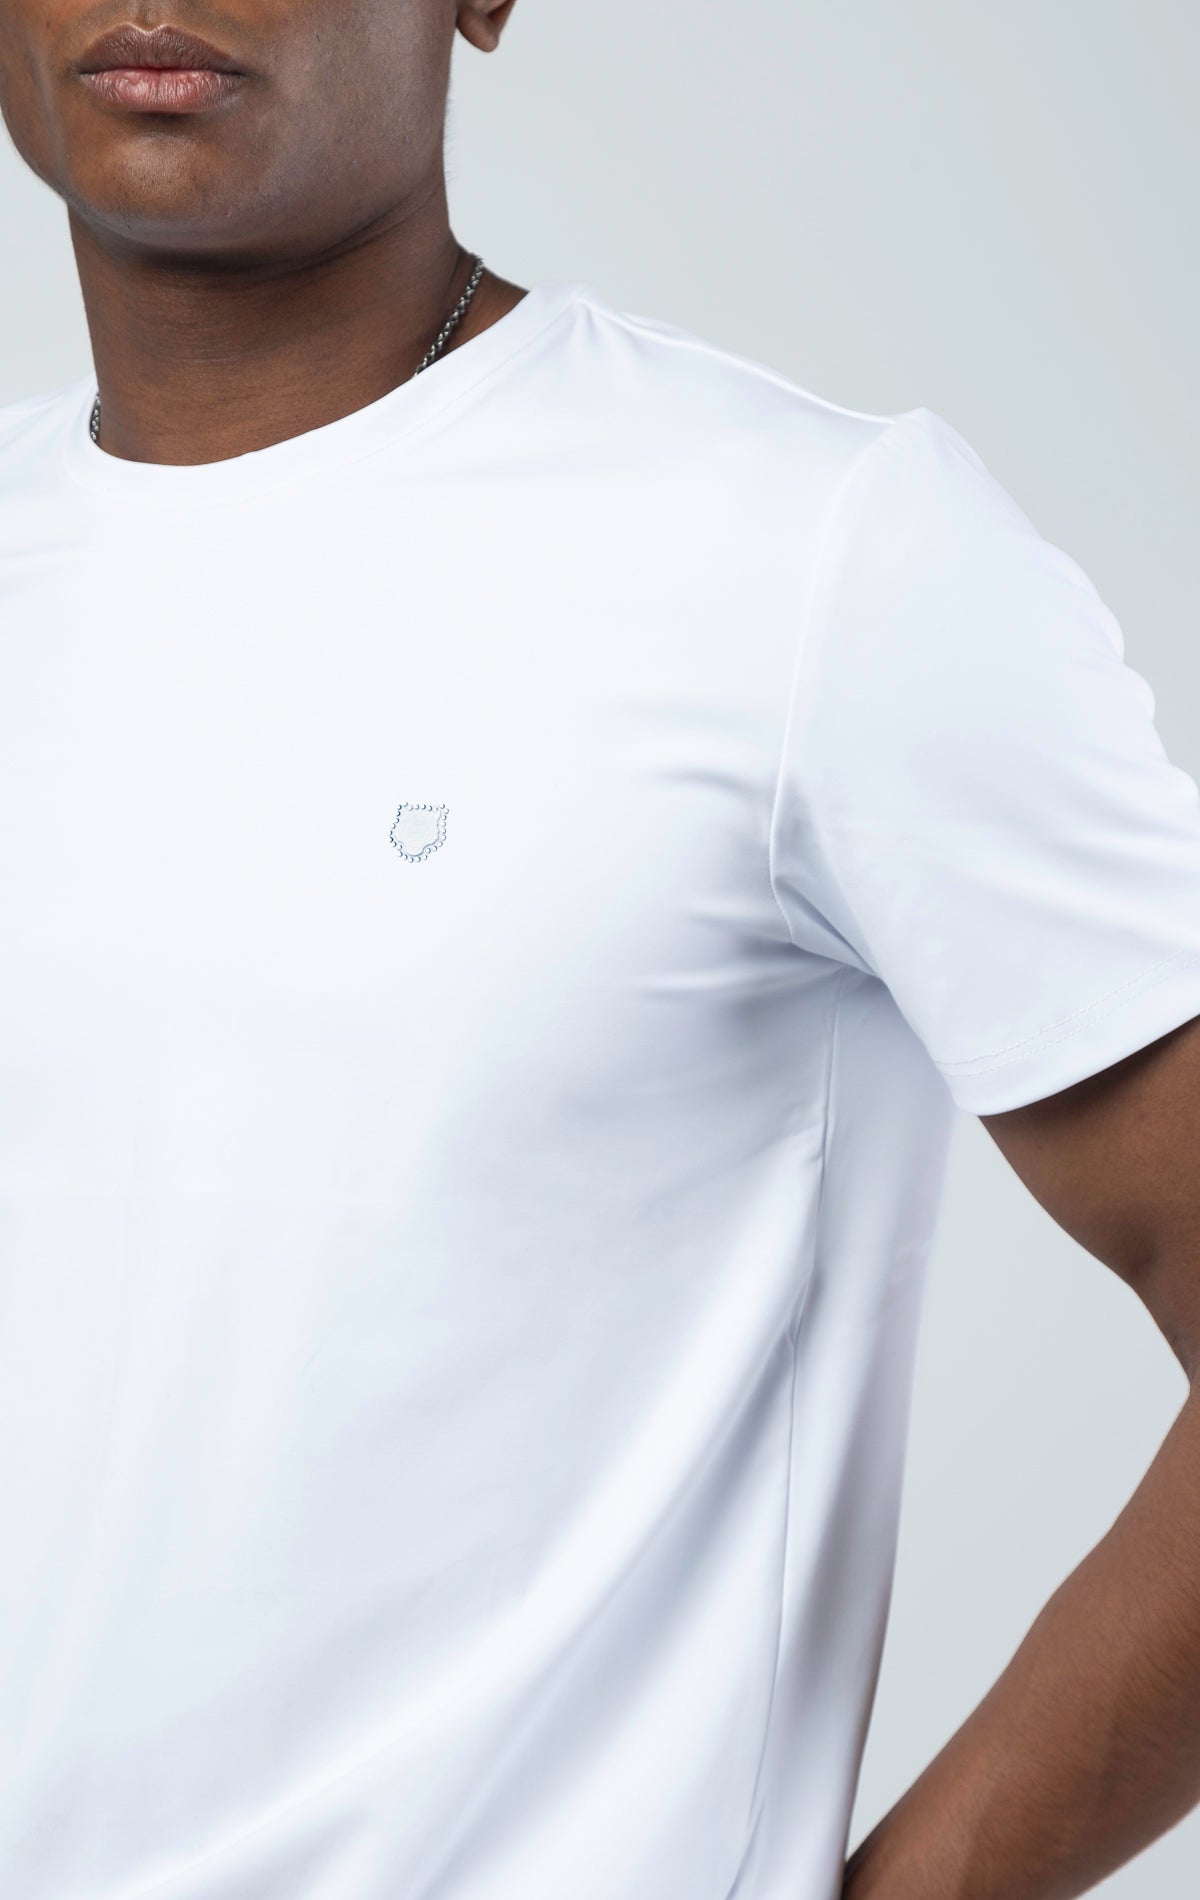 Elegant and comfortable men's tee in smooth fabric, perfect for casual and formal occasions